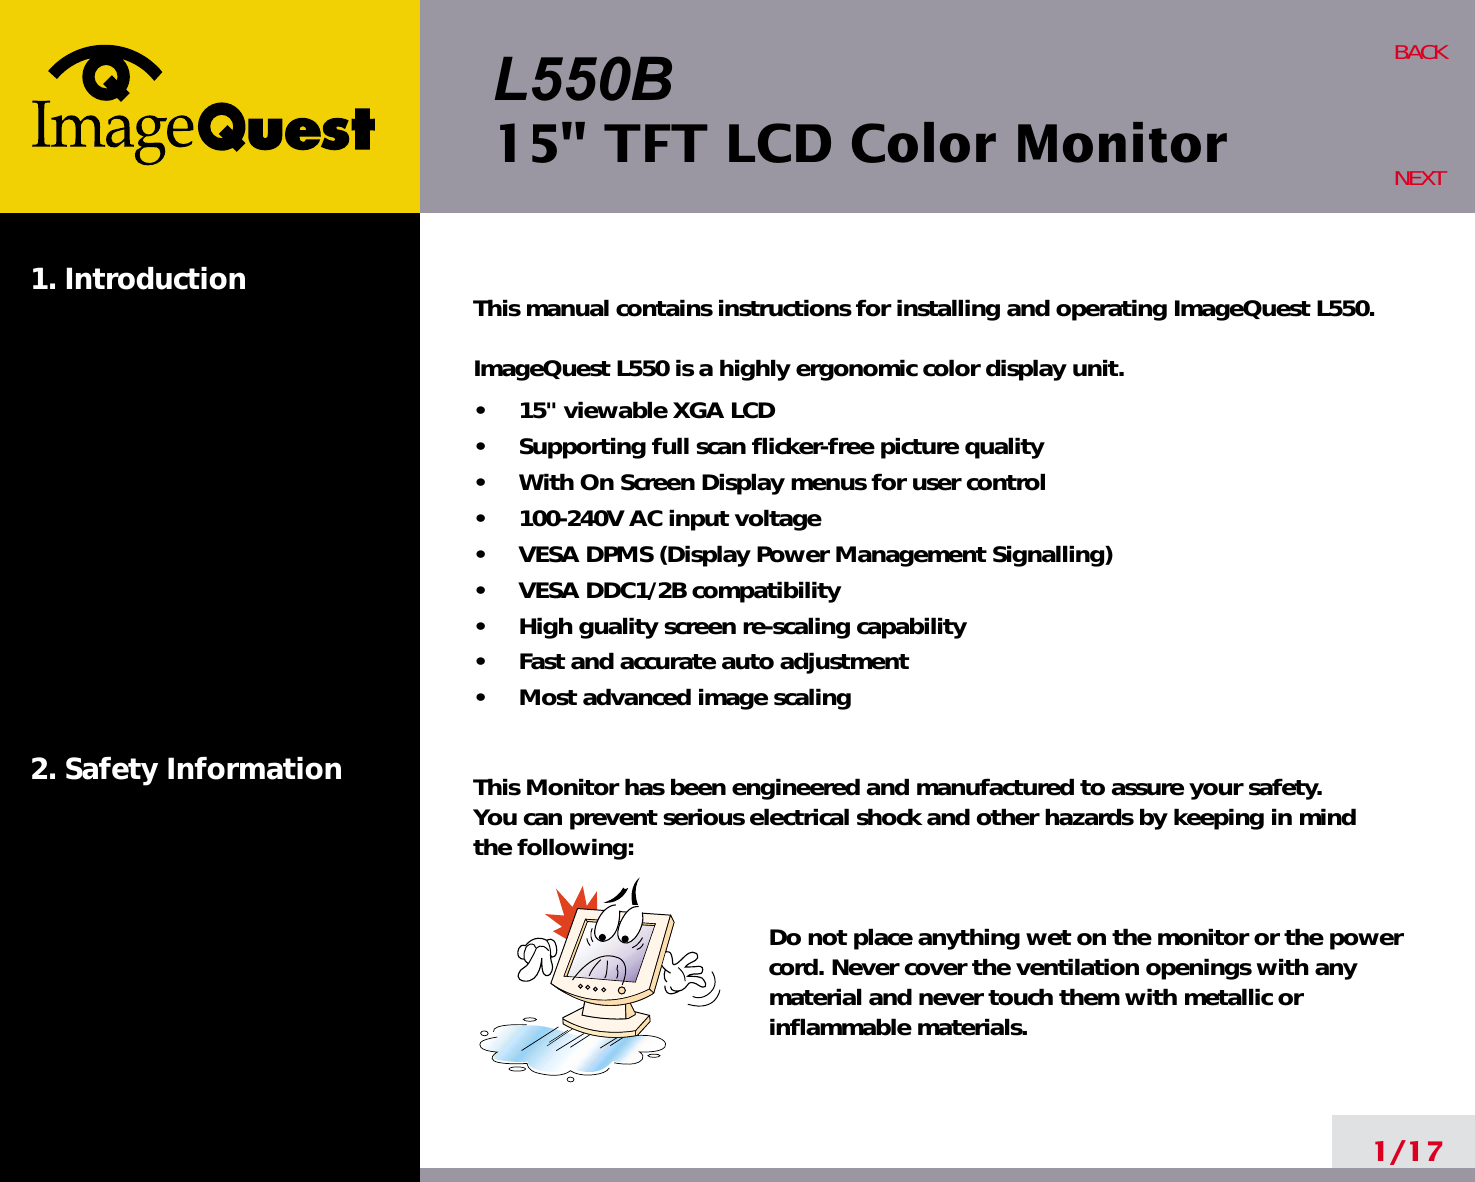 L550B15&quot; TFT LCD Color Monitor1. Introduction2. Safety Information1/17BACKNEXTThis manual contains instructions for installing and operating ImageQuest L550.ImageQuest L550 is a highly ergonomic color display unit.•     15&quot; viewable XGA LCD•     Supporting full scan flicker-free picture quality•     With On Screen Display menus for user control•     100-240V AC input voltage•     VESA DPMS (Display Power Management Signalling)•     VESA DDC1/2B compatibility•     High guality screen re-scaling capability•     Fast and accurate auto adjustment•     Most advanced image scalingThis Monitor has been engineered and manufactured to assure your safety. You can prevent serious electrical shock and other hazards by keeping in mind the following:Do not place anything wet on the monitor or the powercord. Never cover the ventilation openings with anymaterial and never touch them with metallic or inflammable materials.